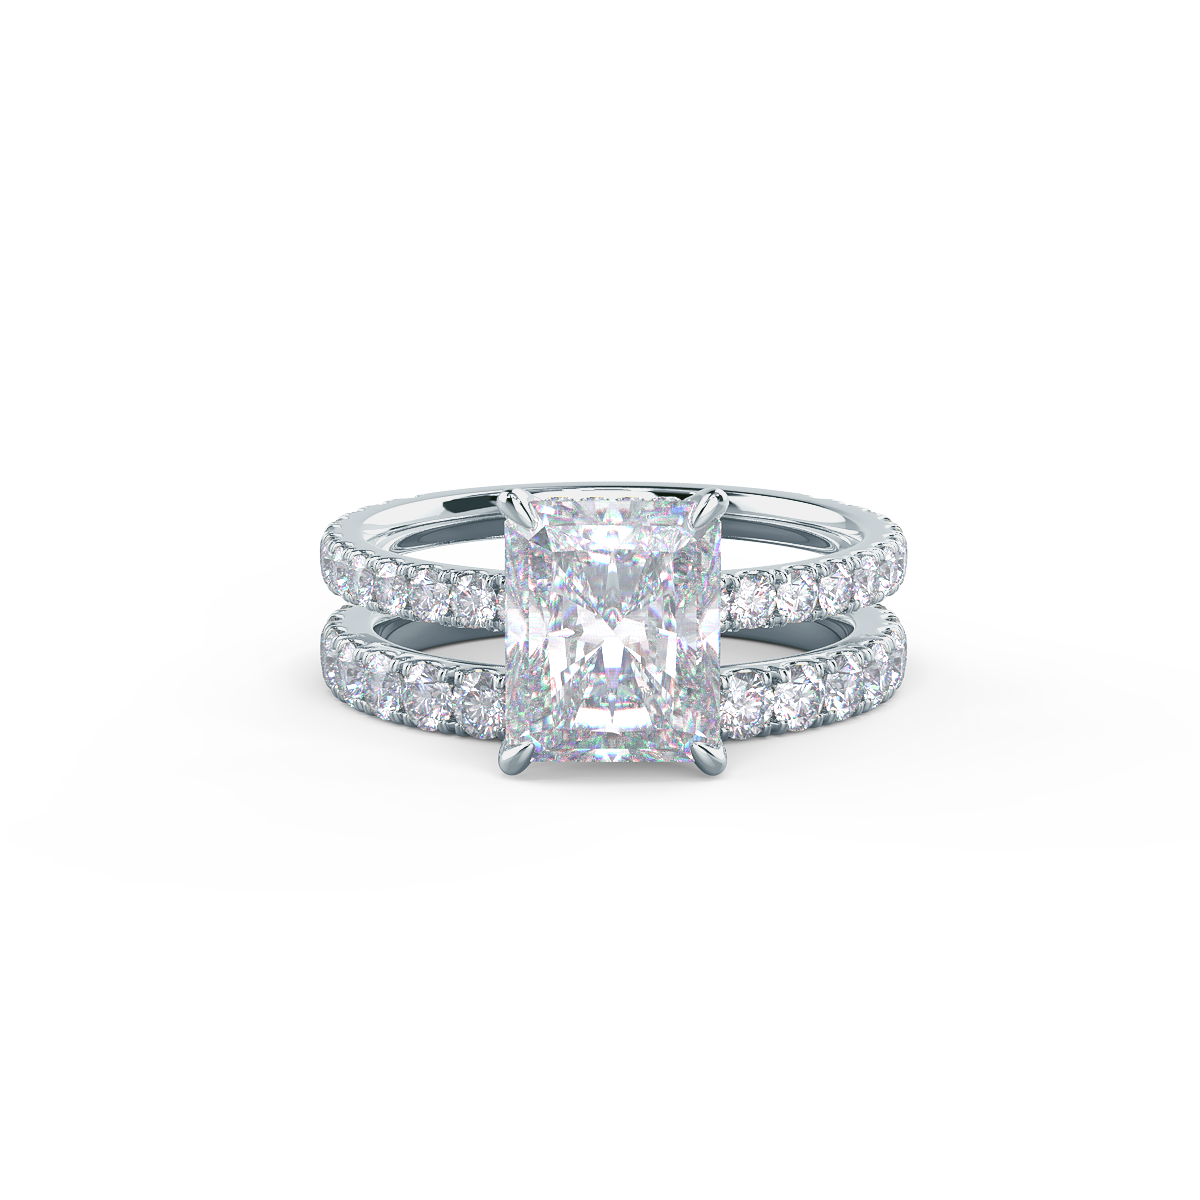  This setting pairs with a variety of wedding band styles.    View Wedding Band Details   